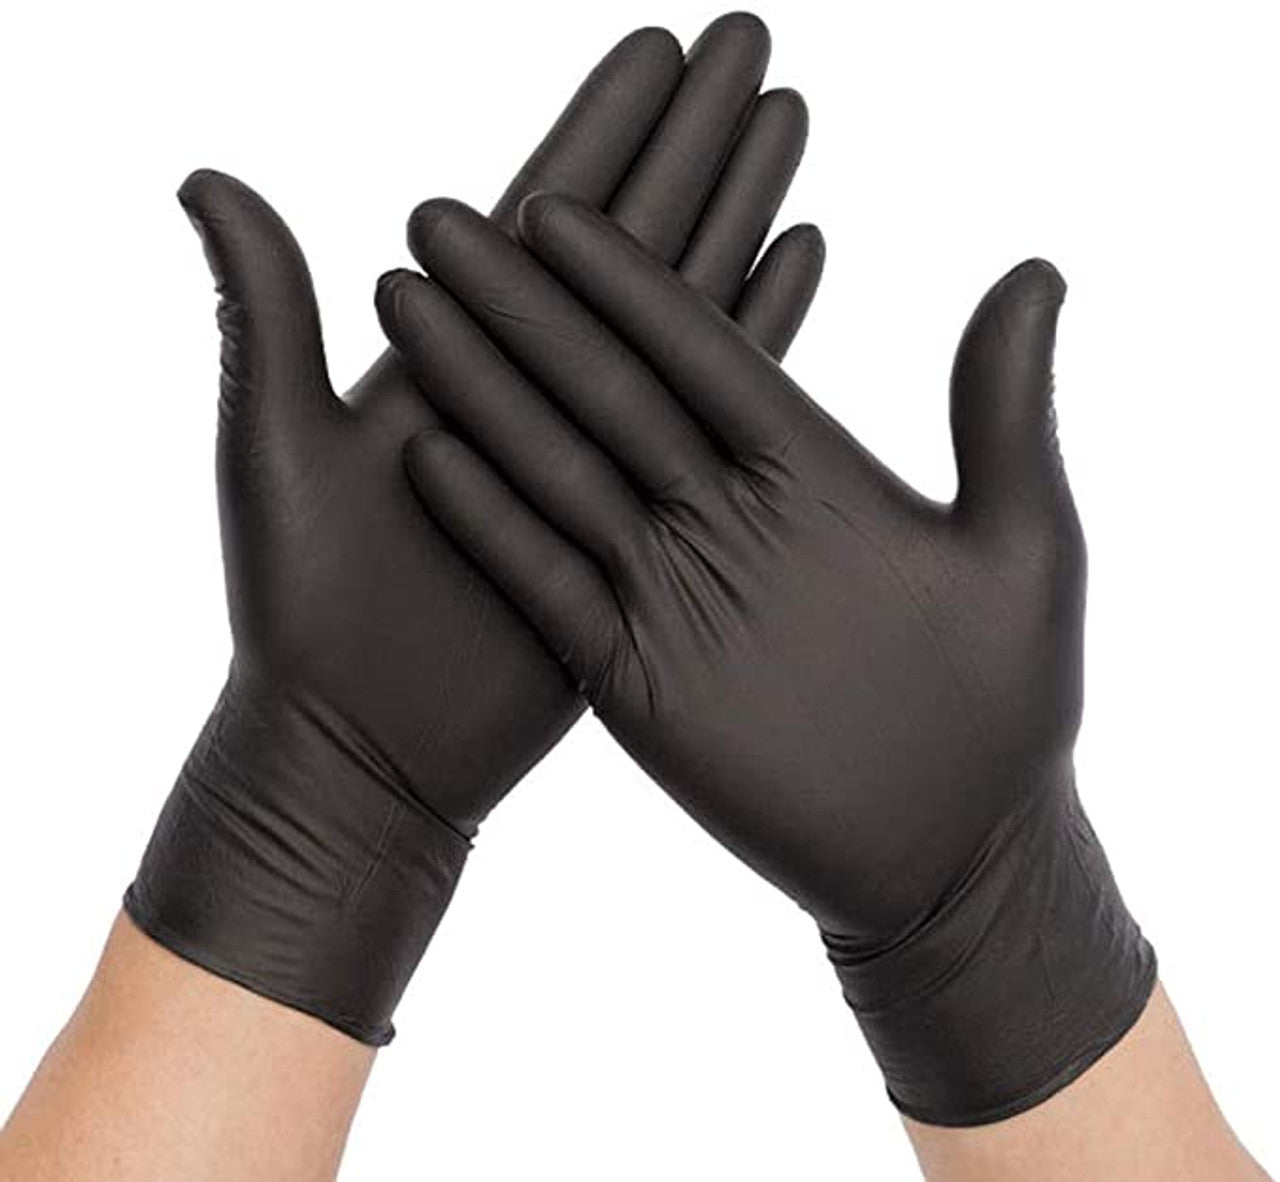 Black Exam Nitrile Gloves XX-Large By Sempermed 100CT Box